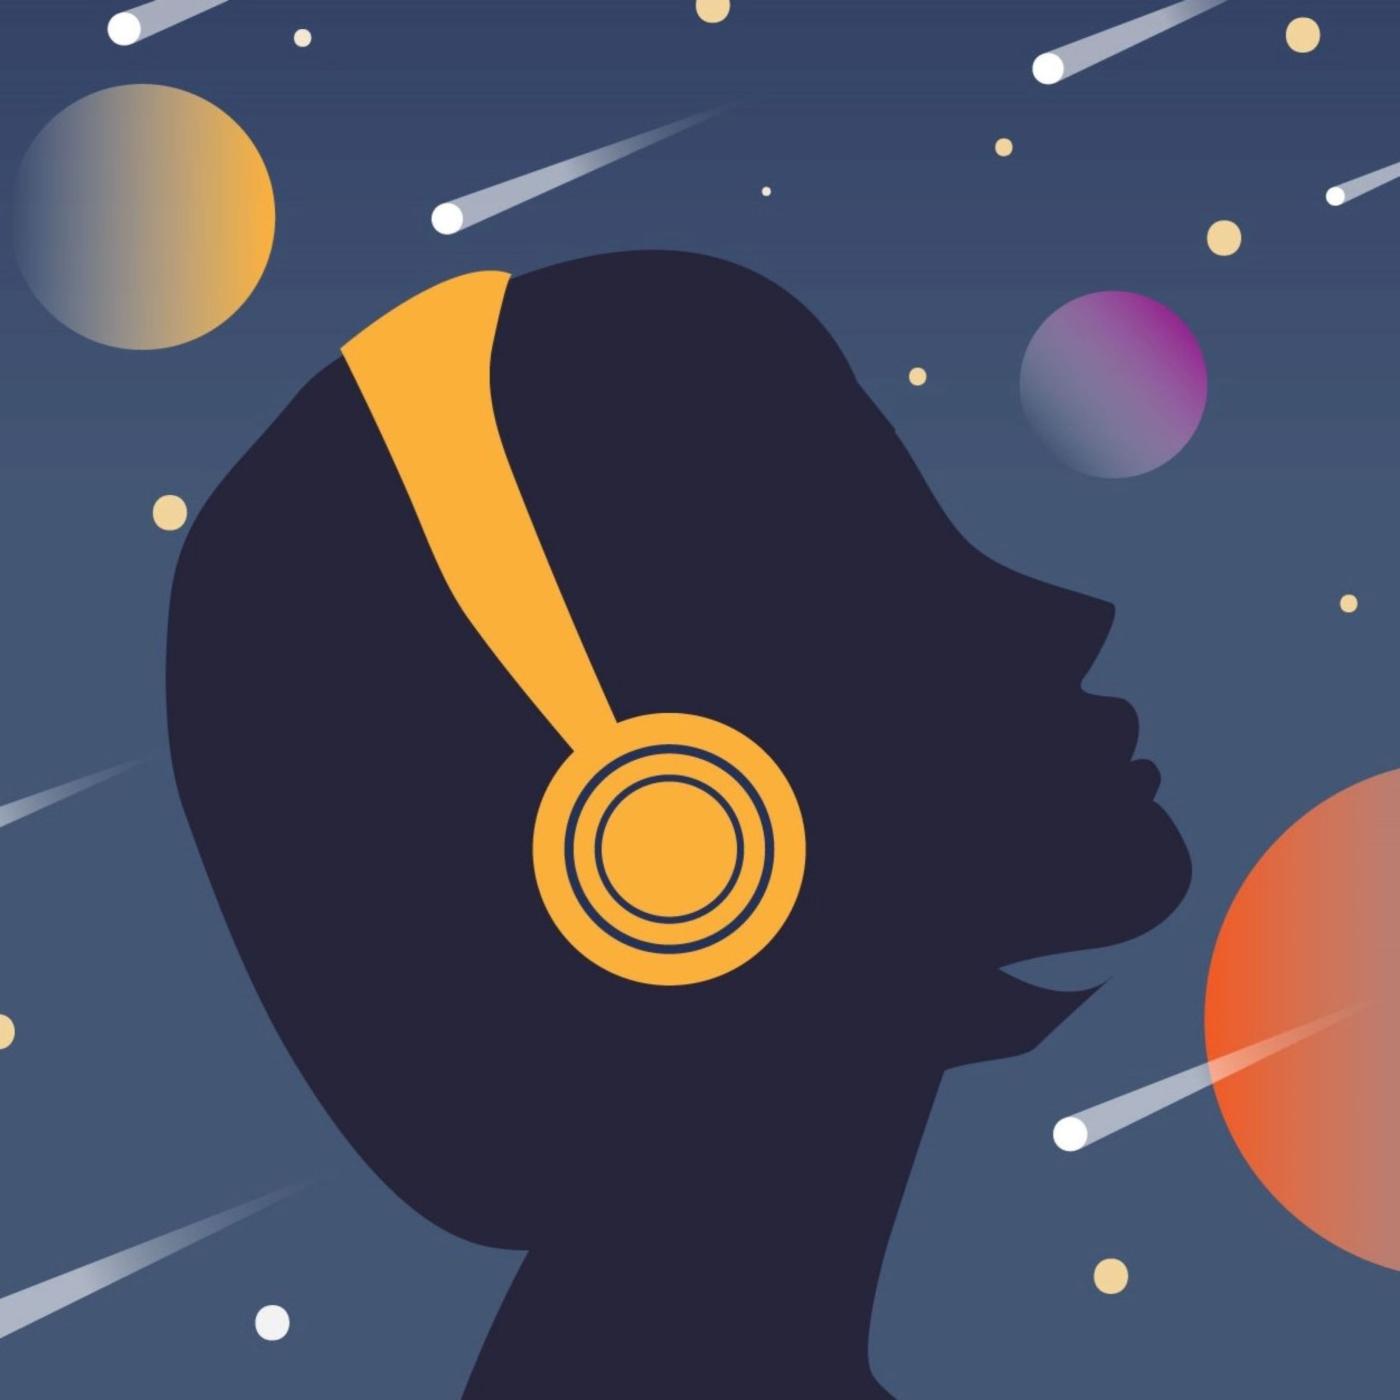 A drawing of a woman in silhouette wearing headphones in front of planets and shooting stars.